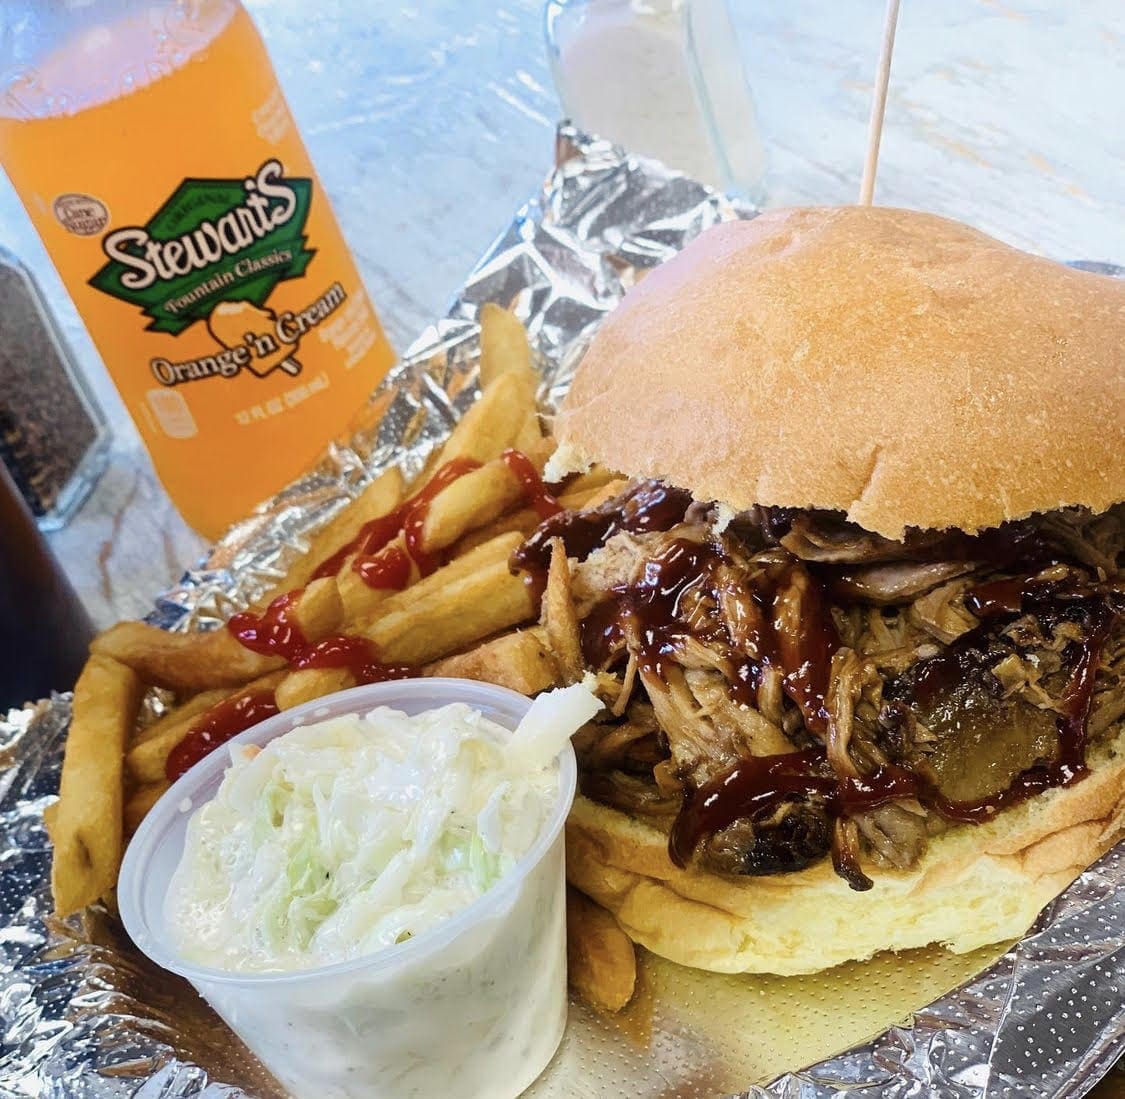 Pulled pork sandwich from Smokehouse Grille & BBQ in Wall Twp, NJ